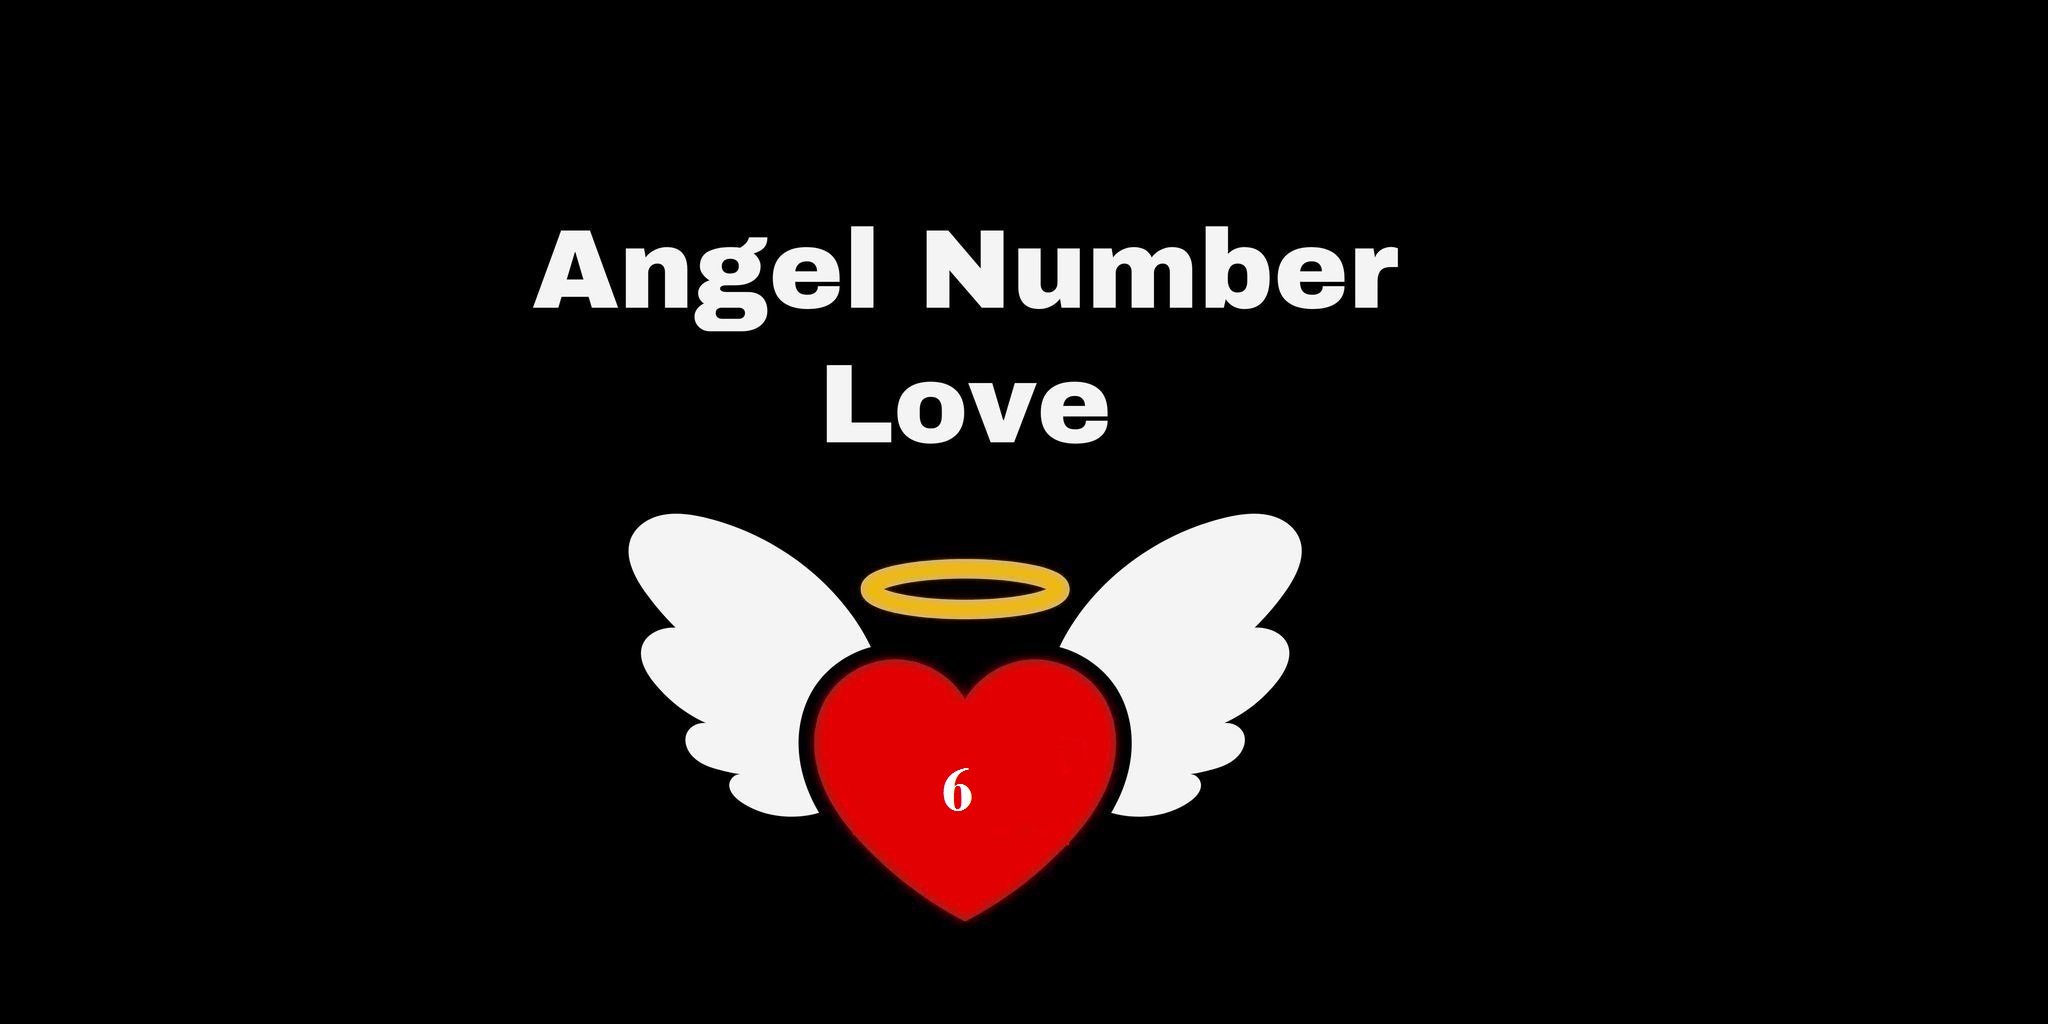 6 Angel Number Meaning In Love